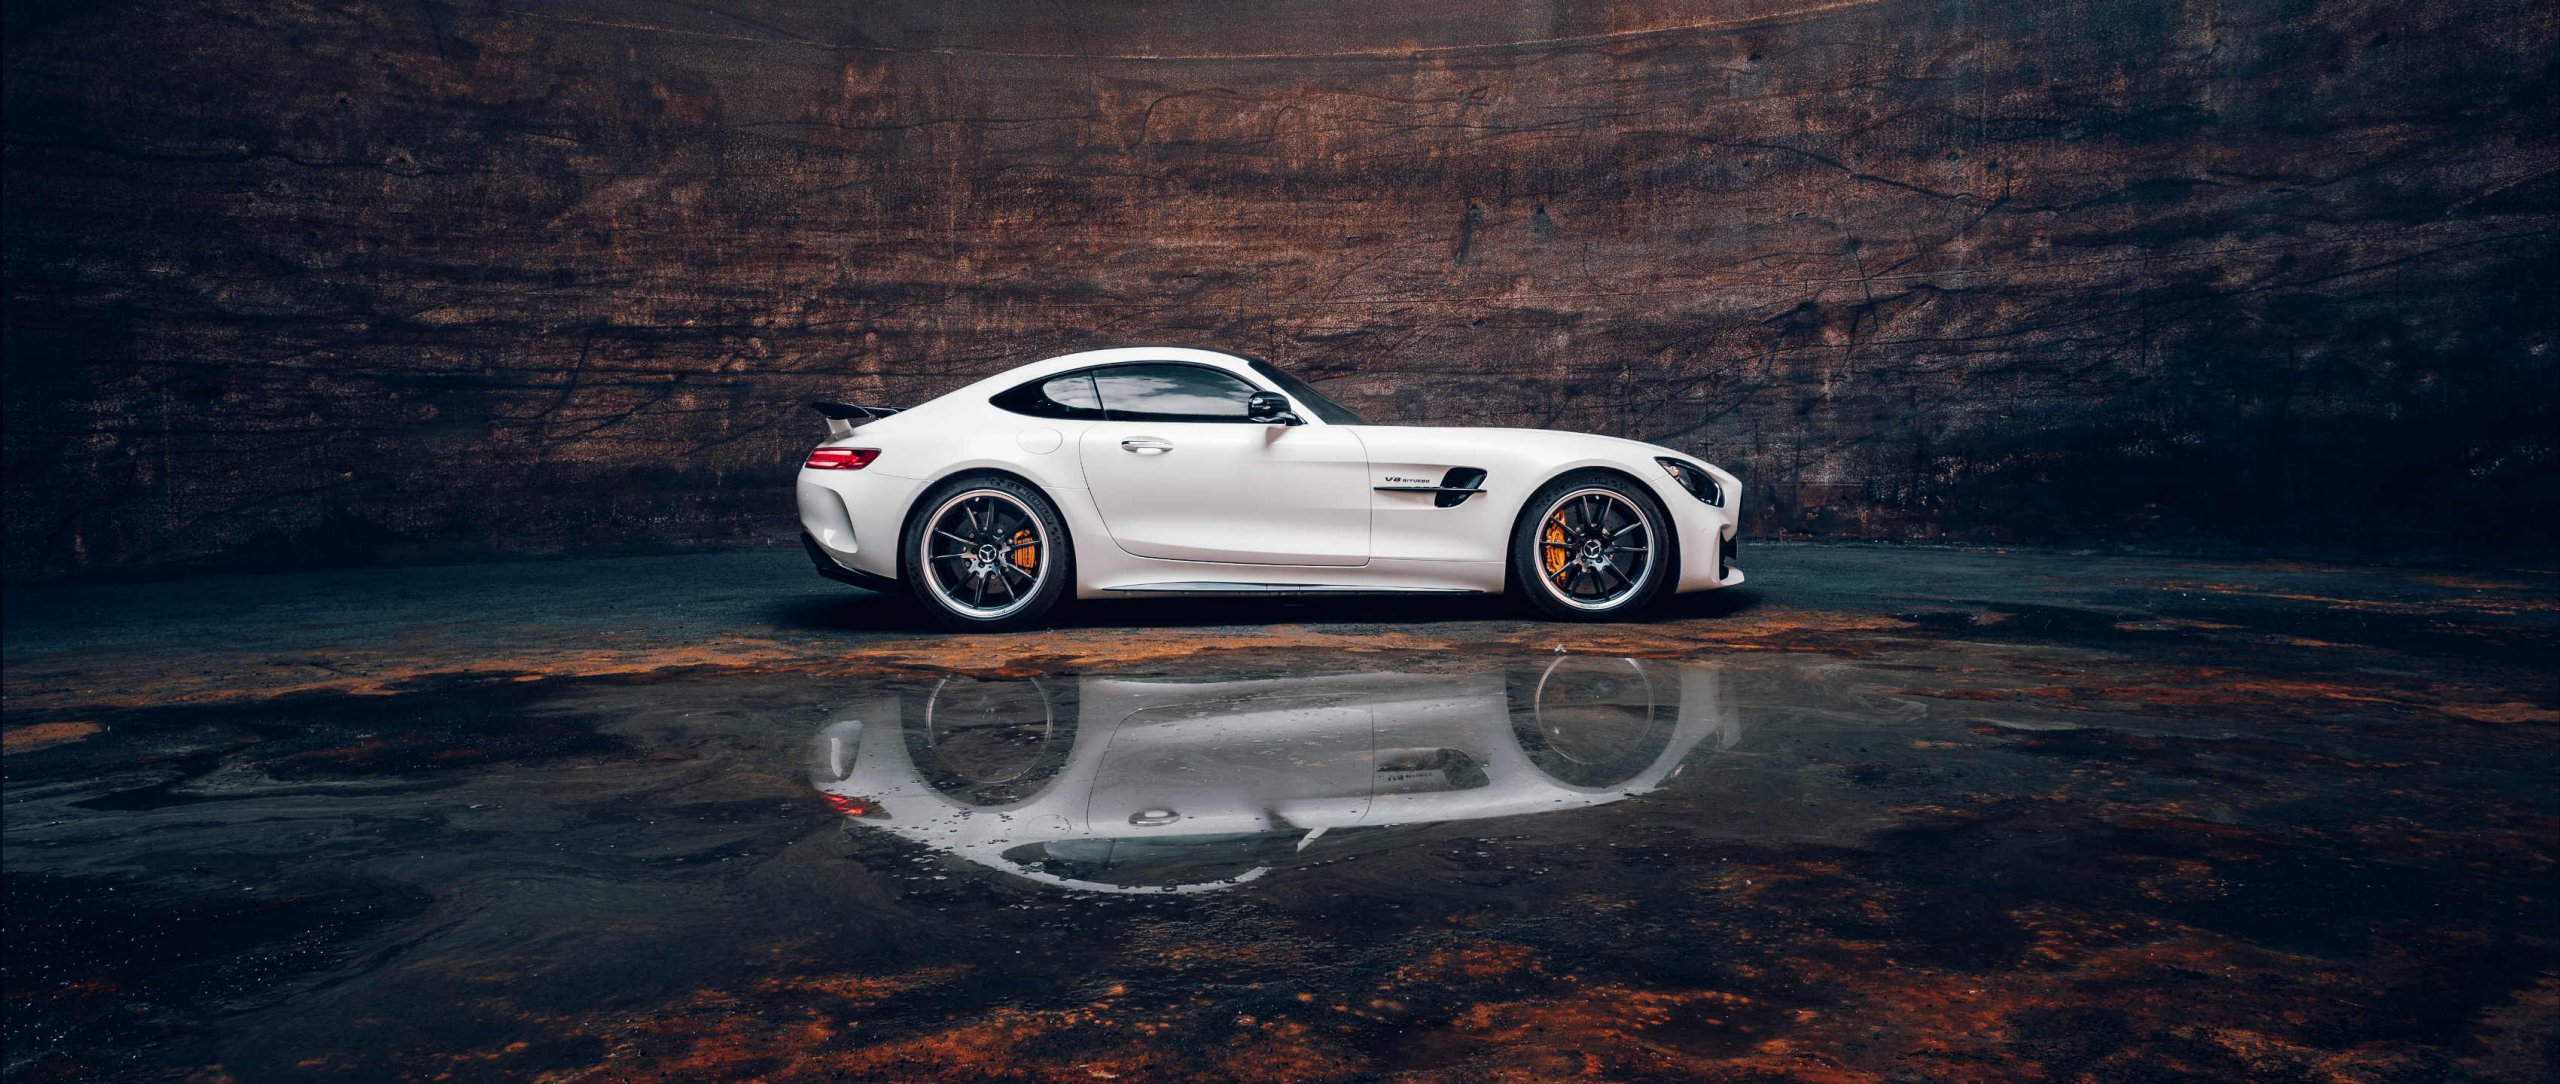 AMG Wallpapers  Wallpaper Cave